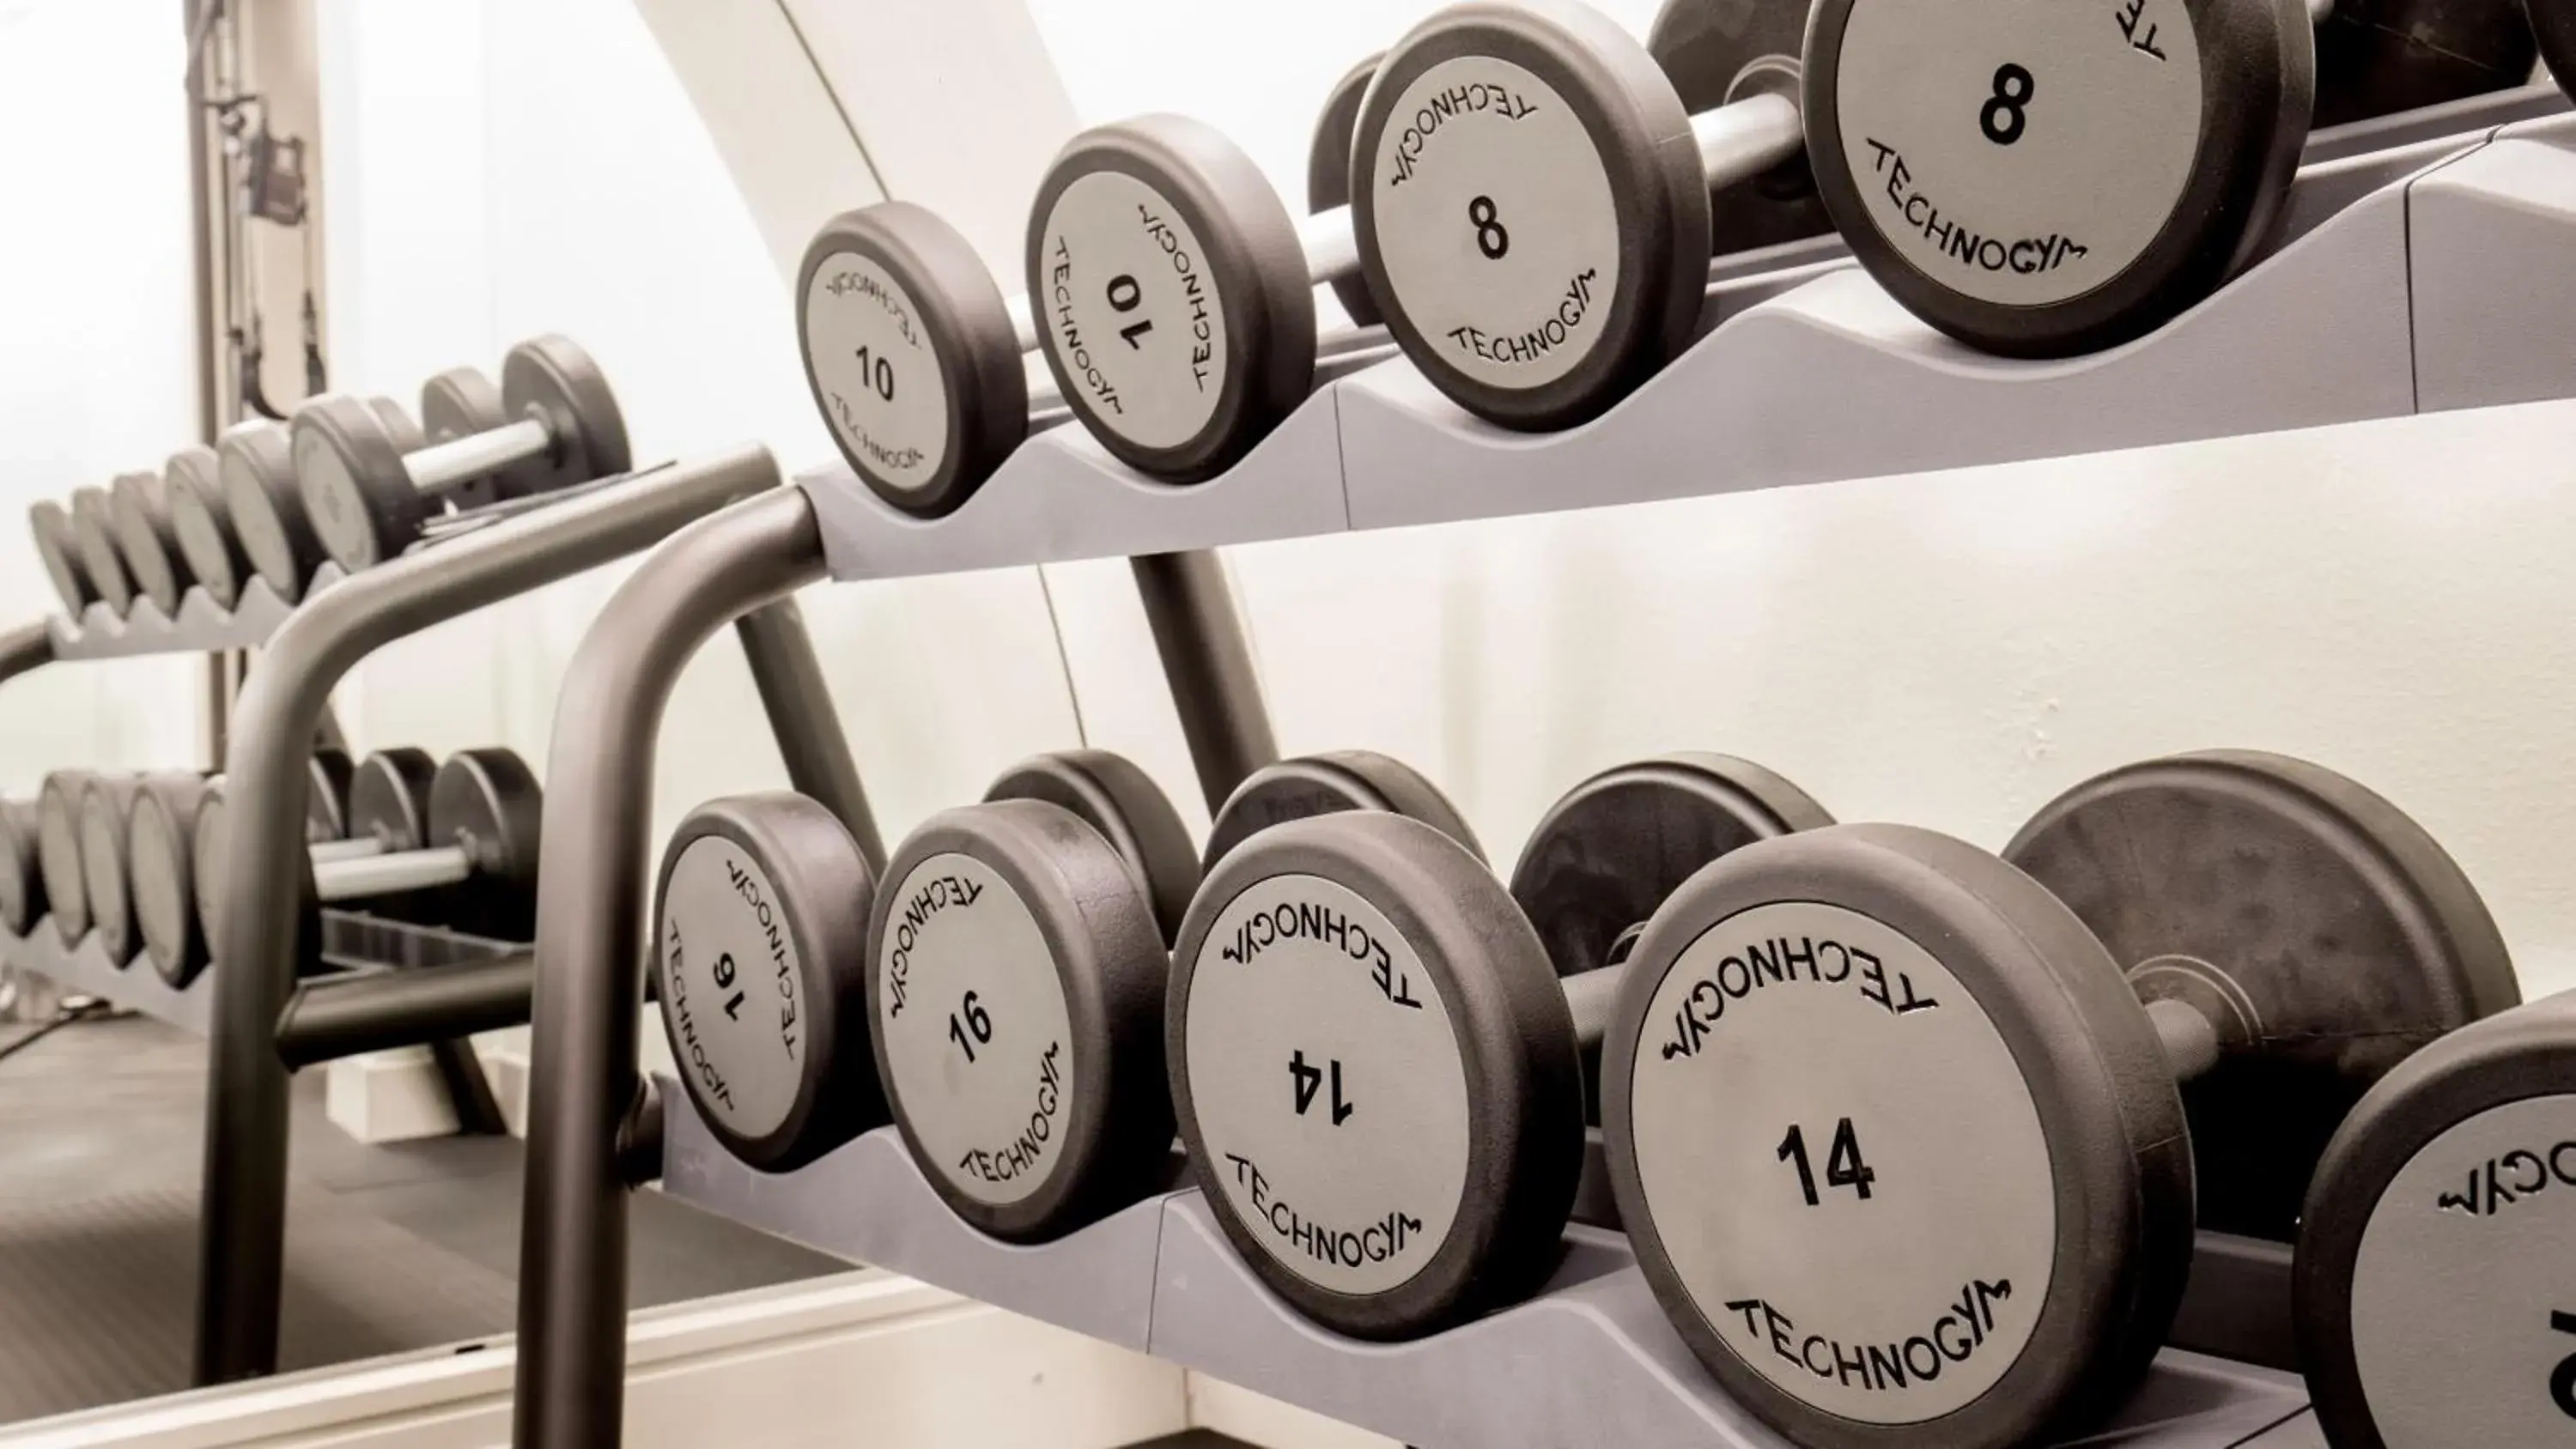 Fitness Center/Facilities in Monti Palace Hotel